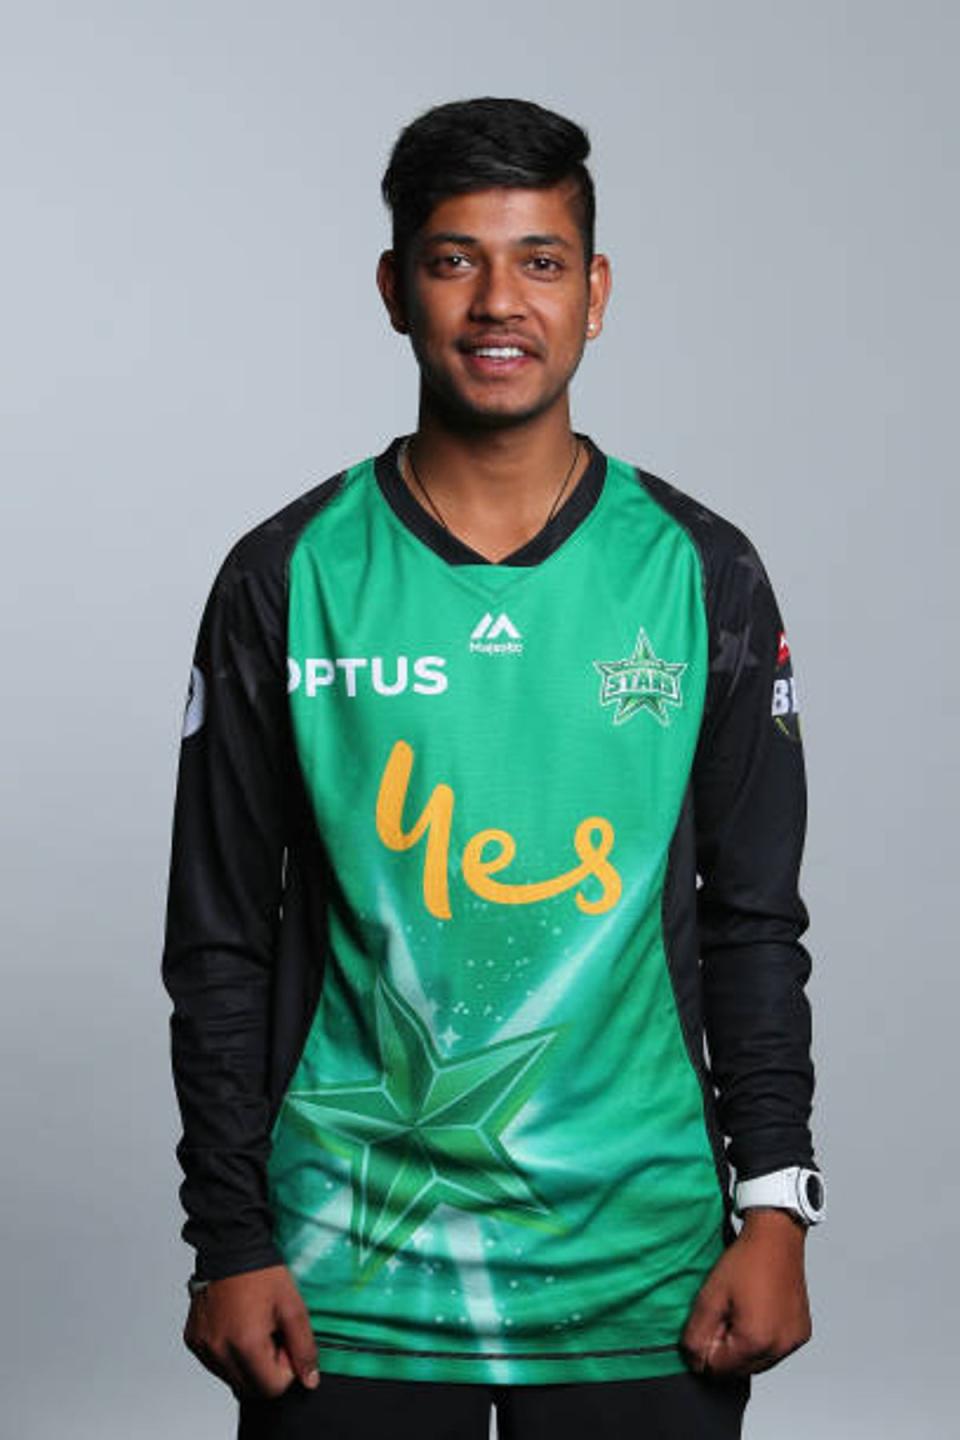 Sandeep Lamichhane, 22, is facing rape charges in Kathmandu (Getty Images)